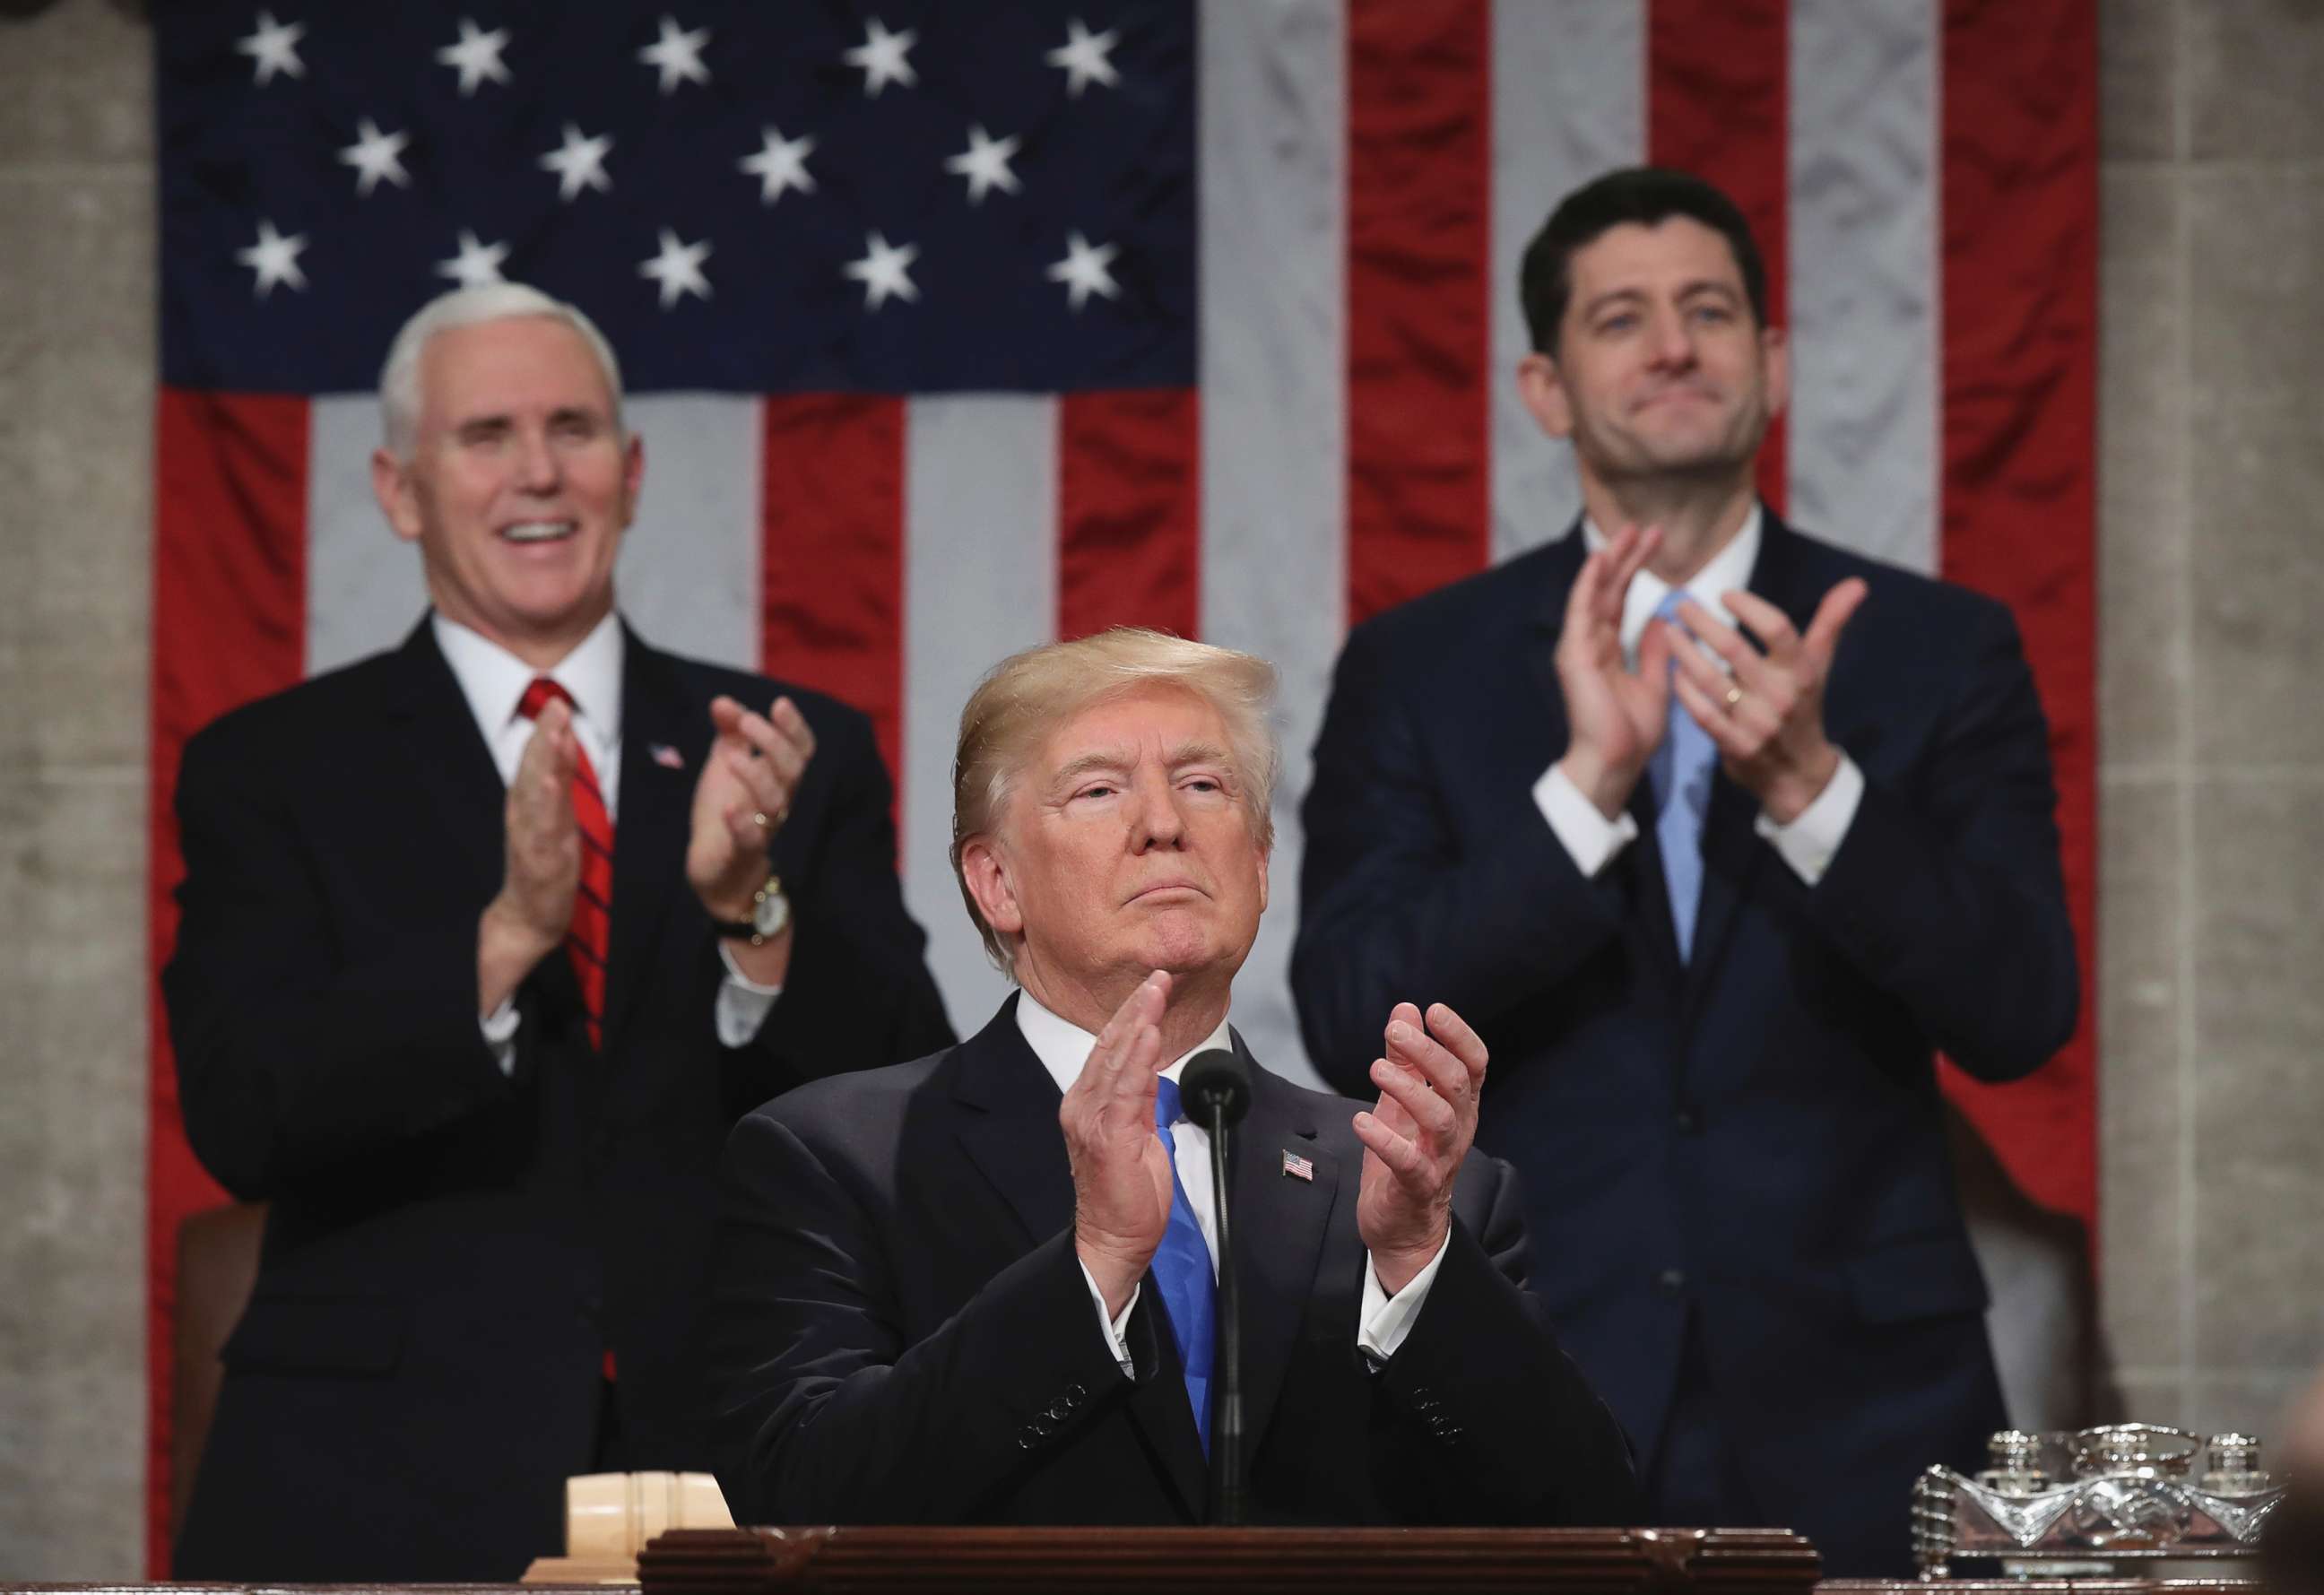 PHOTO: President Donald Trump pauses as he gives his first State of the Union address in the House chamber of the U.S. Capitol to a joint session of Congress, Jan. 30, 2018 in Washington.